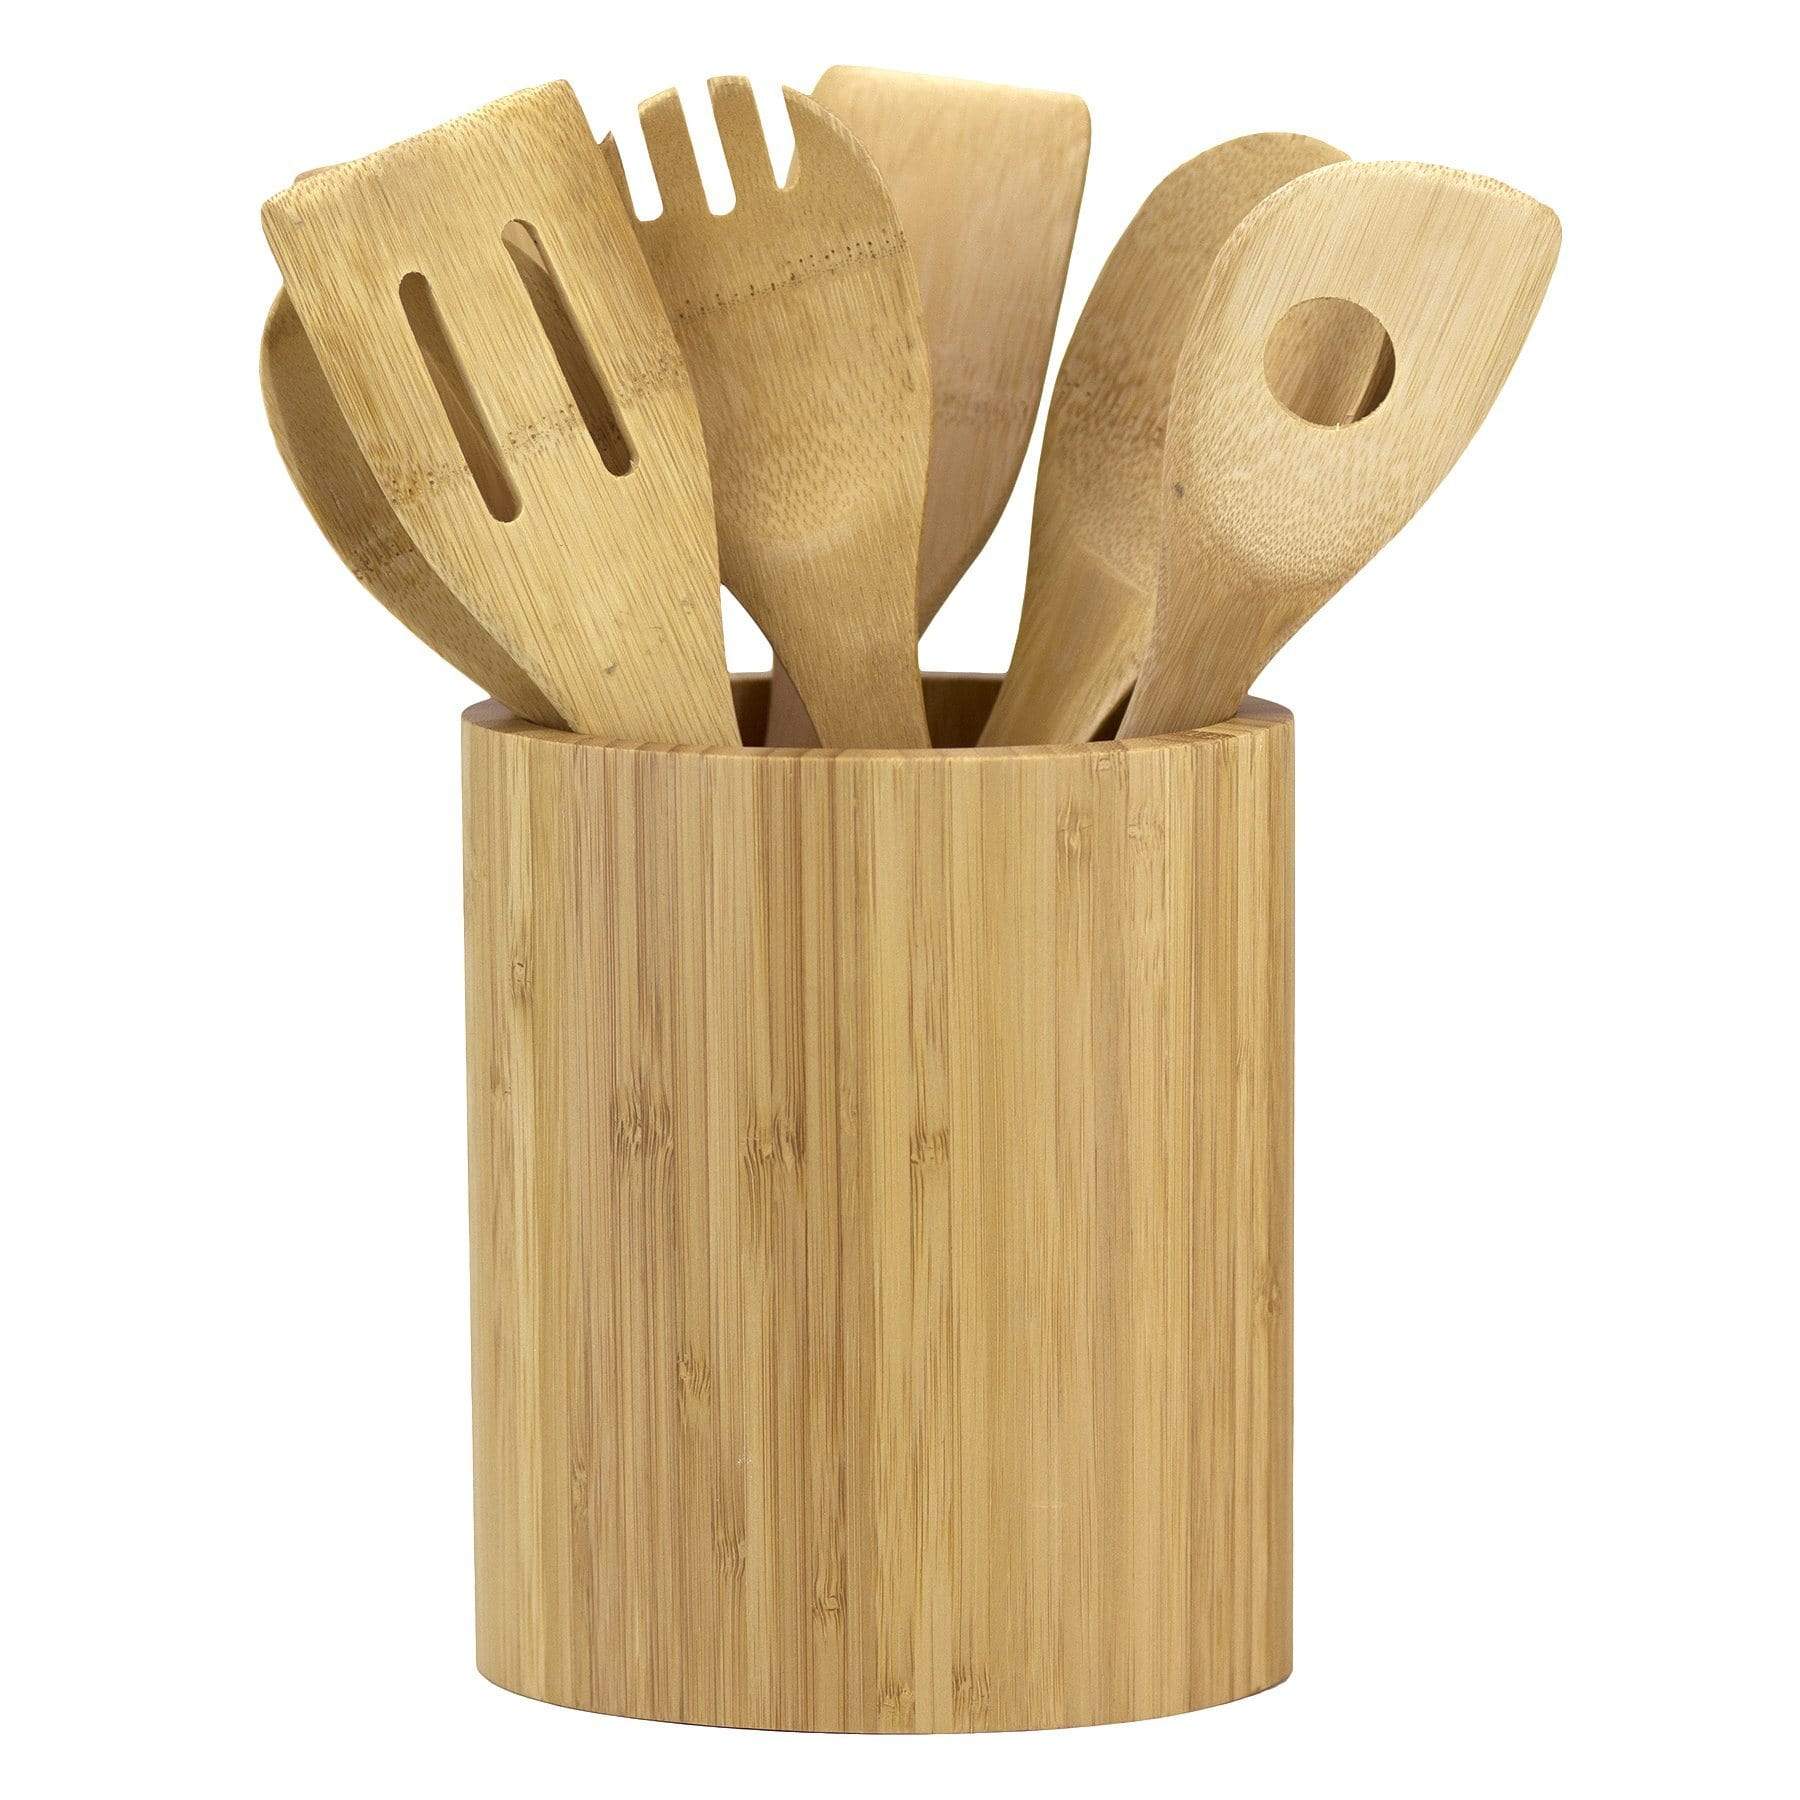 7 Pcs Bamboo Wooden Kitchen Utensil Set with Holder